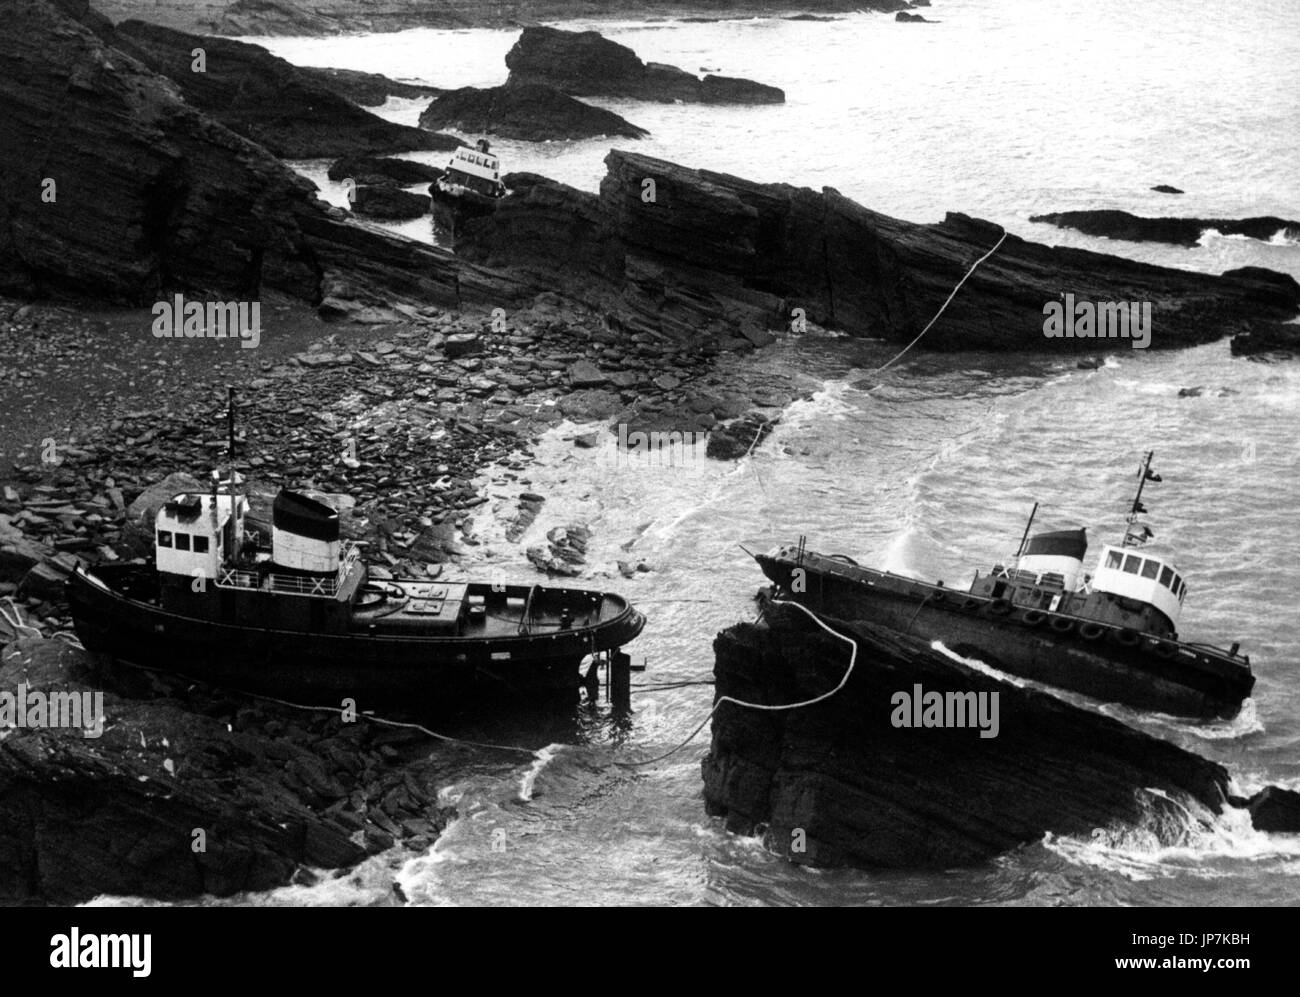 AJAXNETPHOTO. 20TH OCTOBER, 1981. SLOVAS, SOUTH WALES. - TRIPLE TUG WRECK - THREE TUGS WRECKED ON THE ROCKY COAST NEAR SLOVAS AFTER BREAKING FREE FROM THEIR TOW EN ROUTE TO GREECE.  PHOTO:JONATHAN EASTLAND/AJAX REF:812010 1 2 Stock Photo